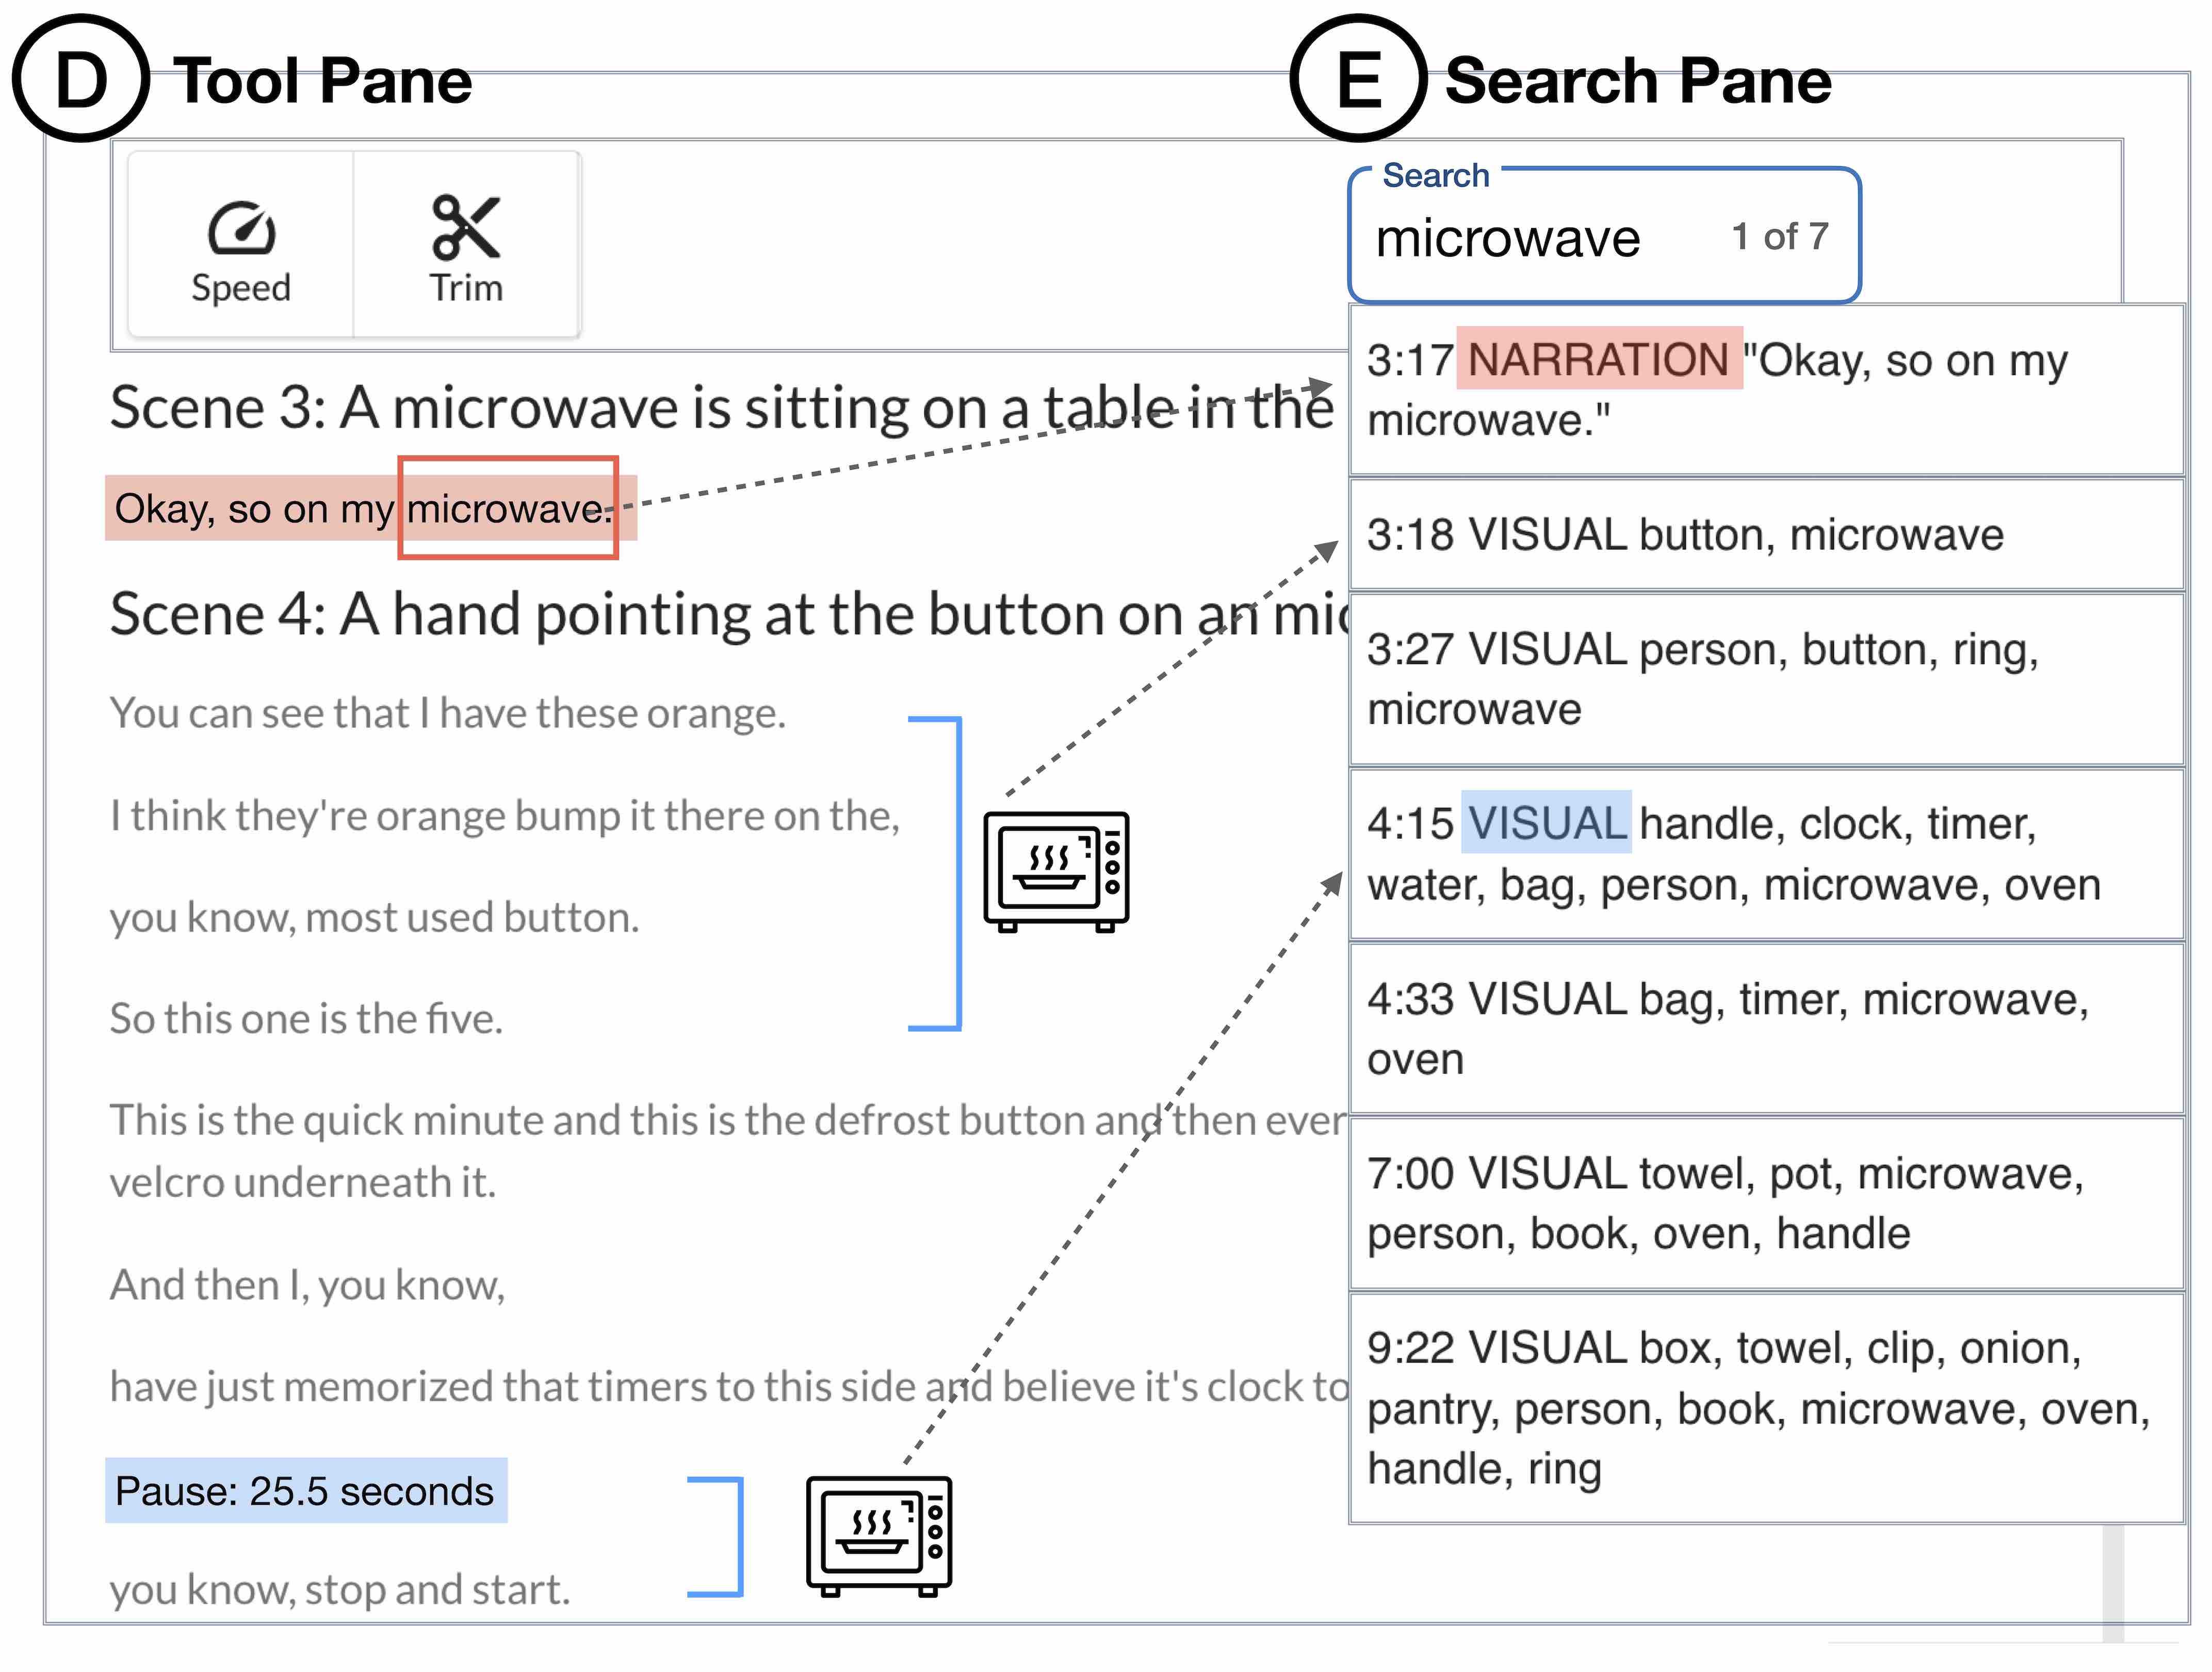 The tool pane and the search pane are presented in the figure. The user is searching for the keyword ``microwave'' and seven search results are listed, where one of the results is narration search and the other seven results are visual search.